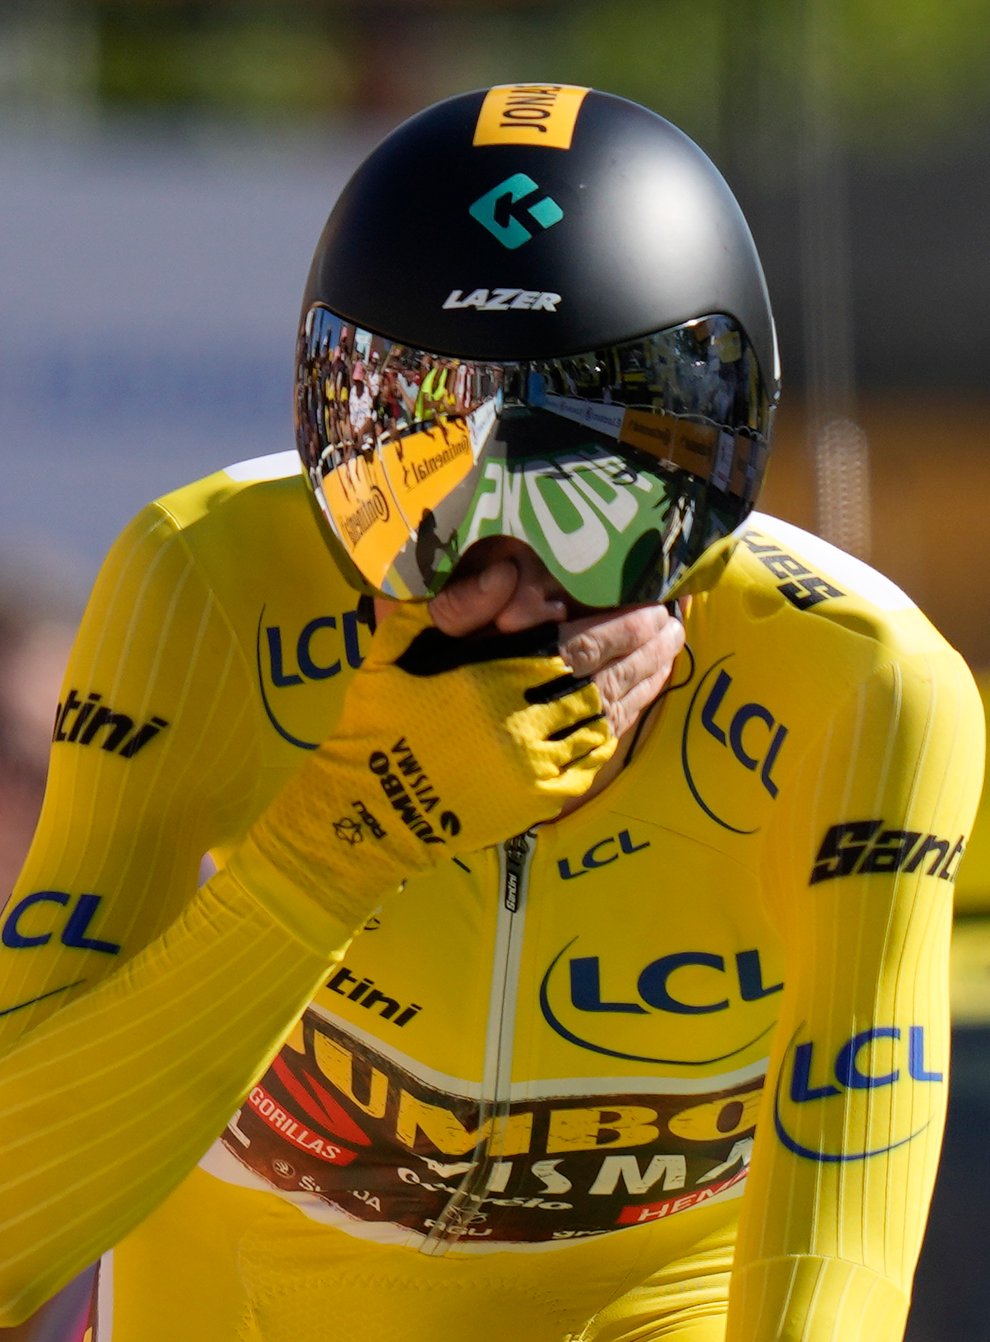 Jonas Vingegaard is set to win the Tour de France after finishing second on Saturday’s time trial (Thibault Camus/AP)